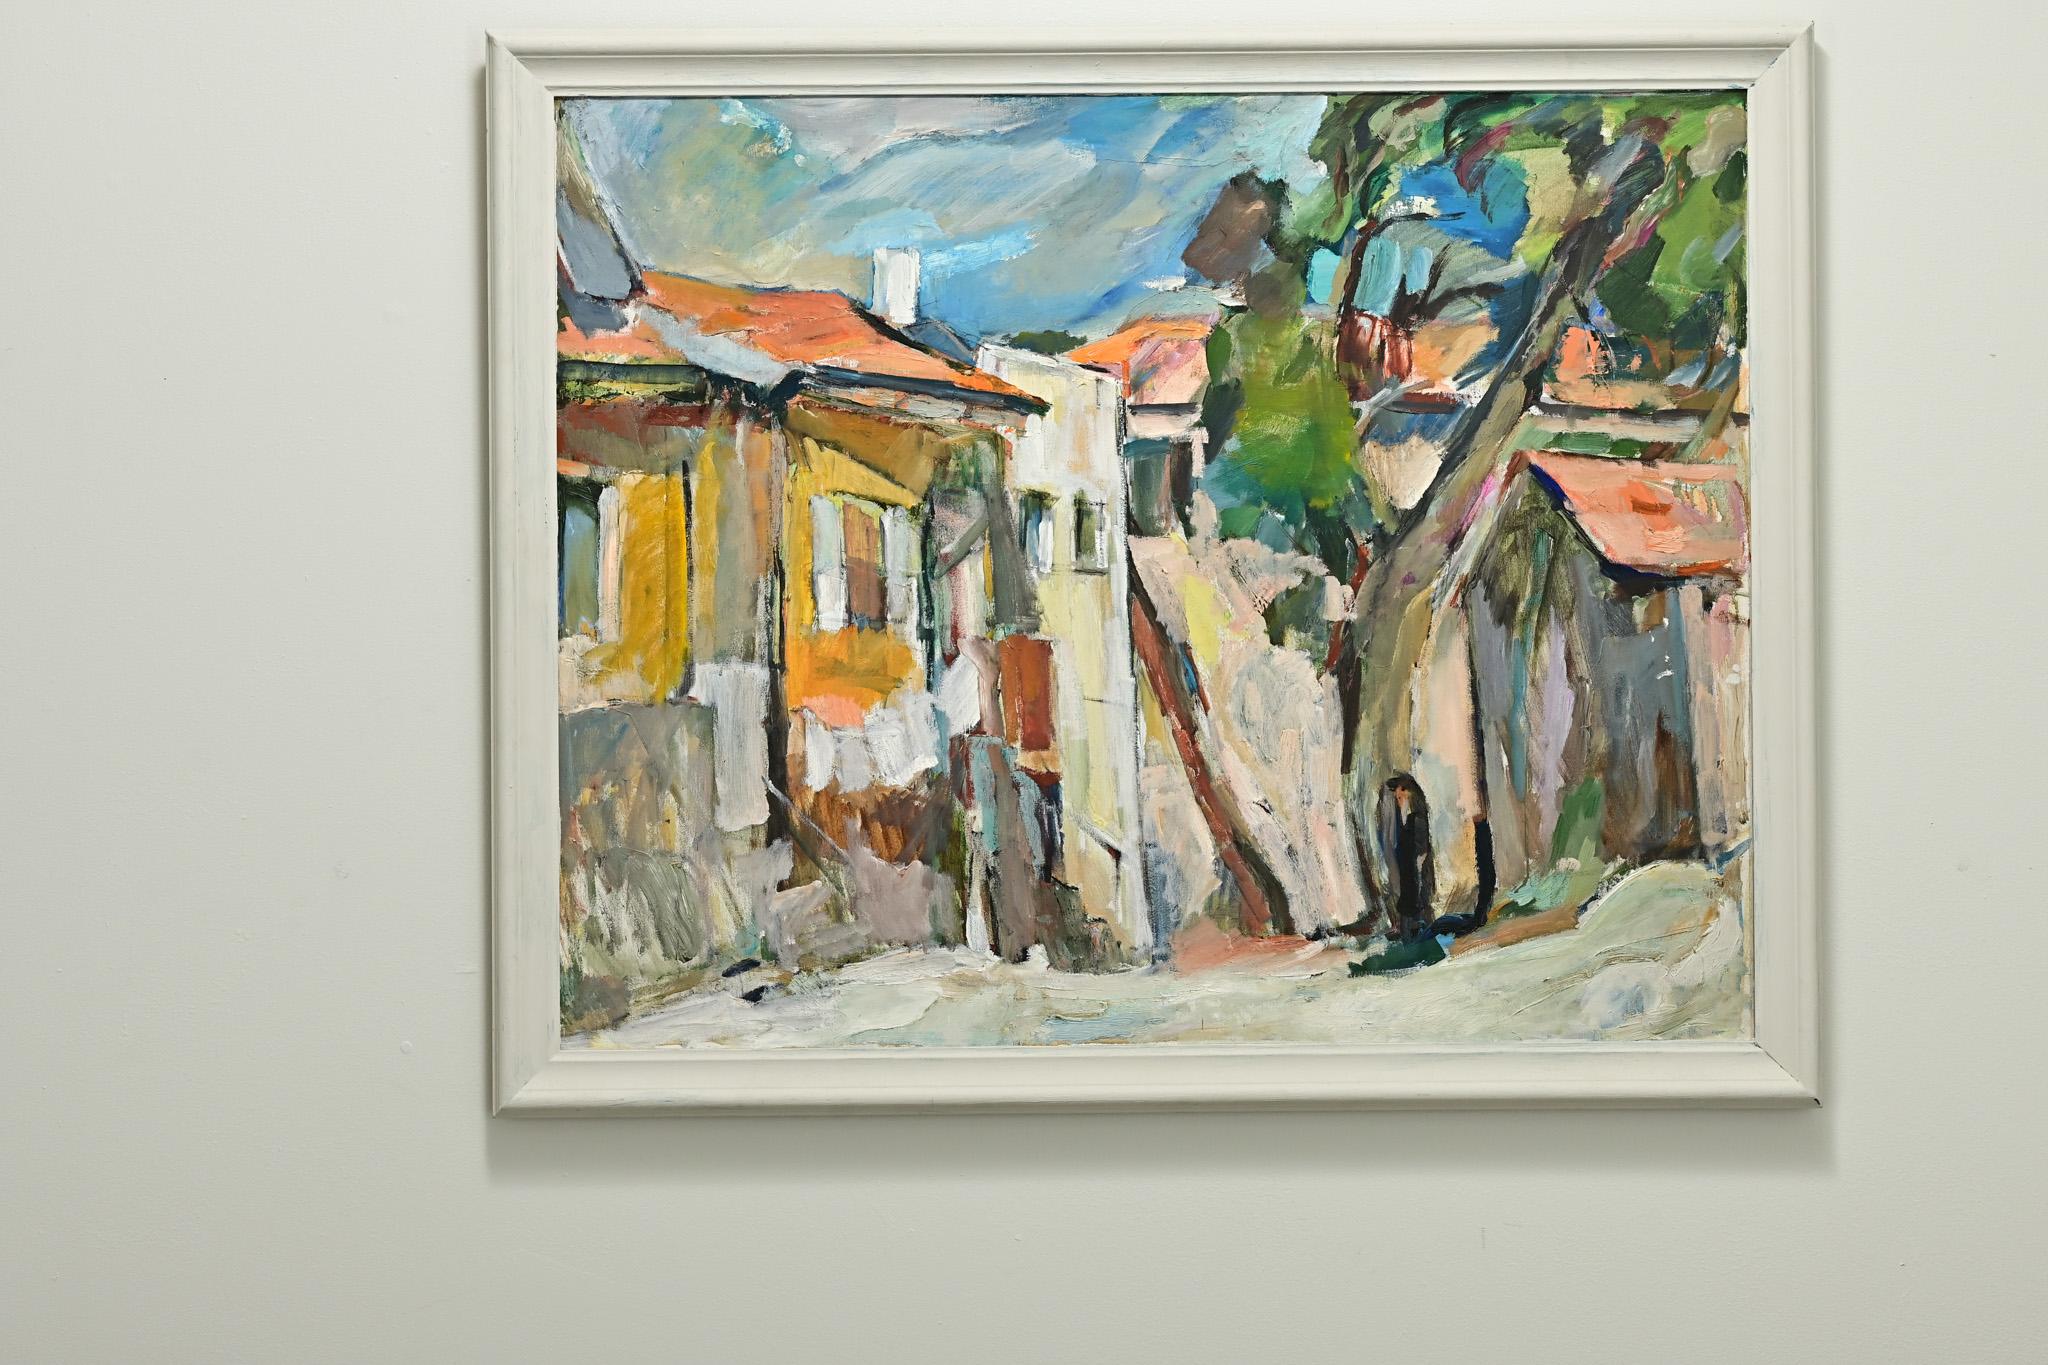 A colorful abstract painting by Anna Khodorovsky Lipkind, a Jewish artist in Mea Shearim, Jerusalem. This modern painting is oil on canvas framed in a white painted frame. Be sure to view the detailed images to see the current condition.